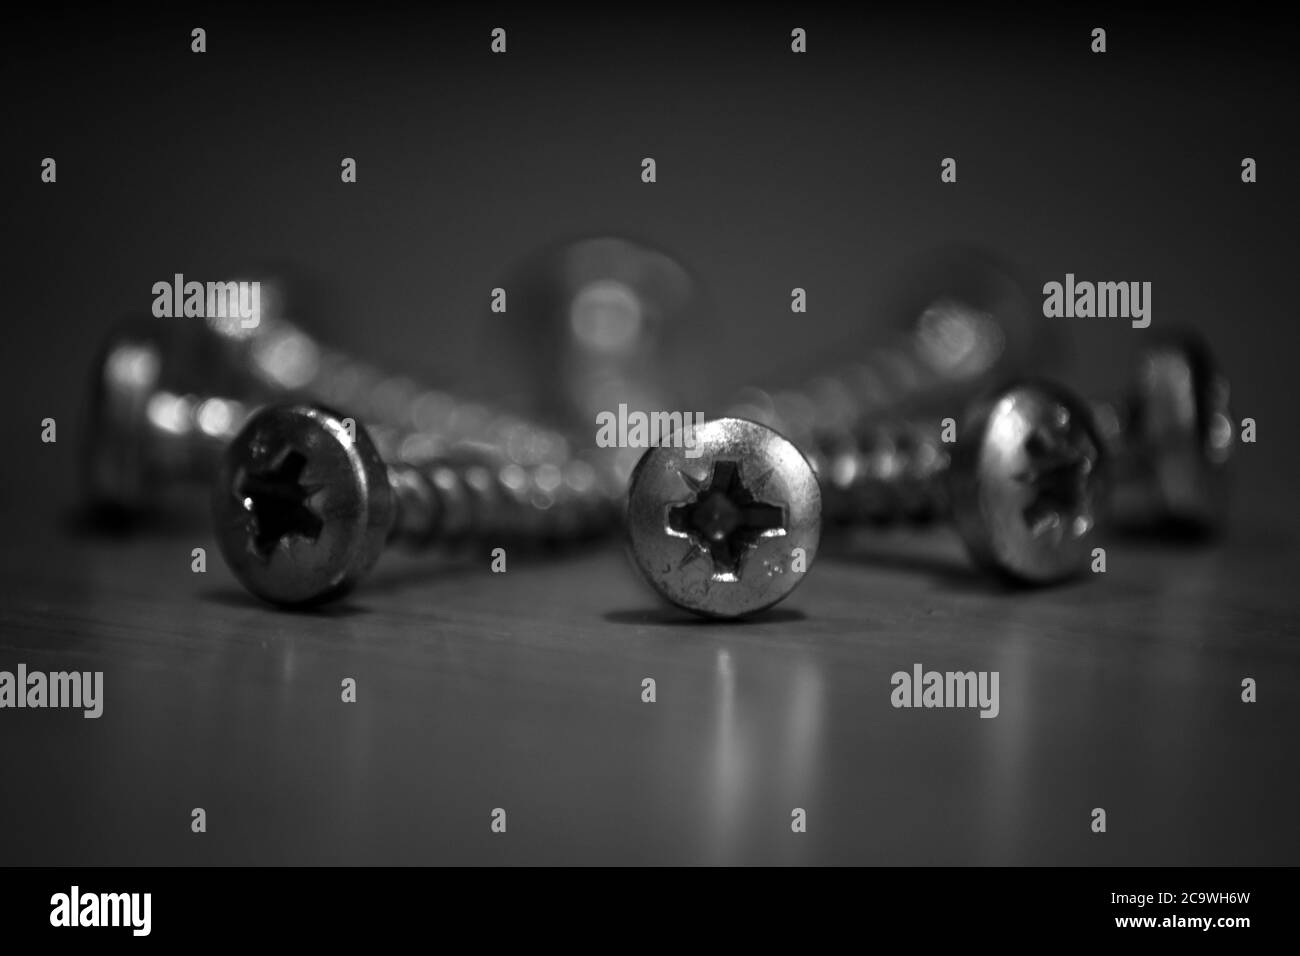 Black and white screws arranged in a circle Stock Photo